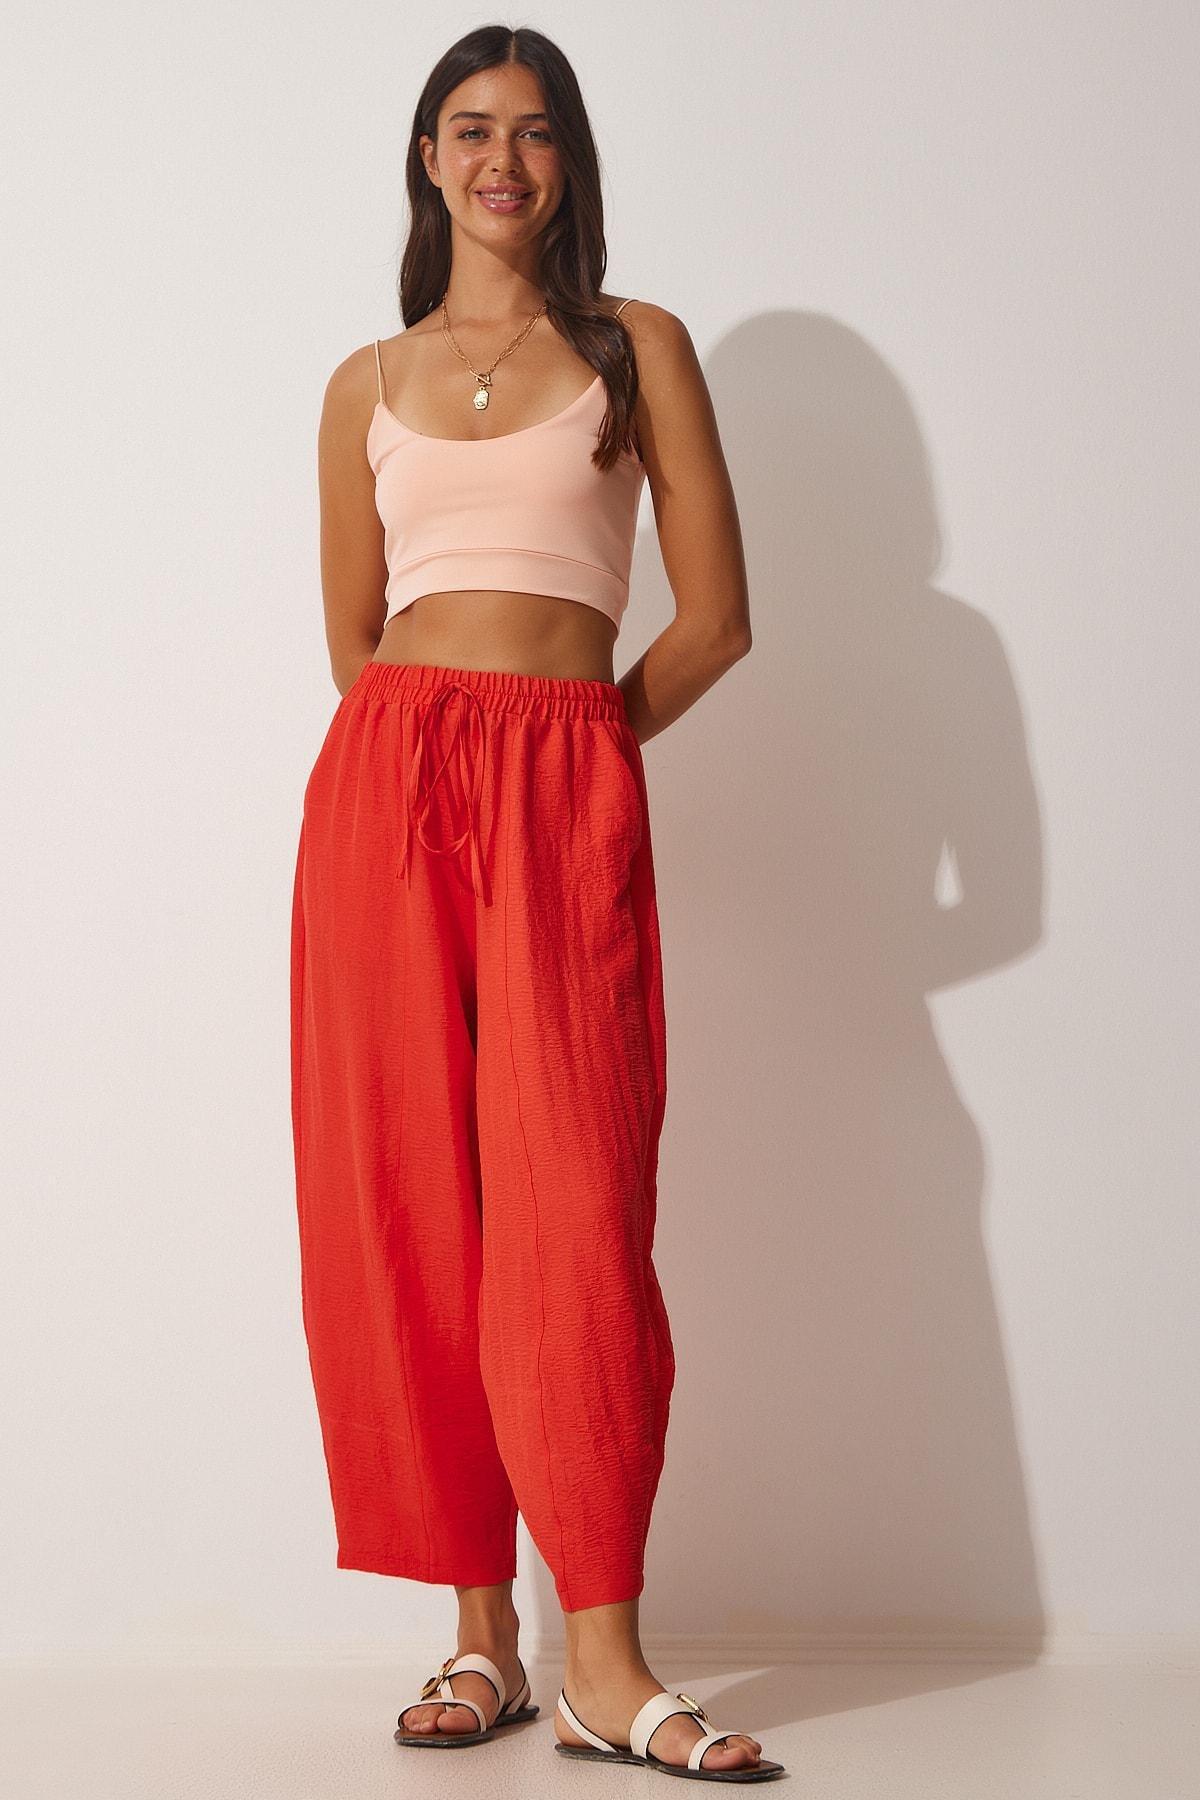 Happiness Istanbul - Orange Blossom Pocketed Trousers <br>